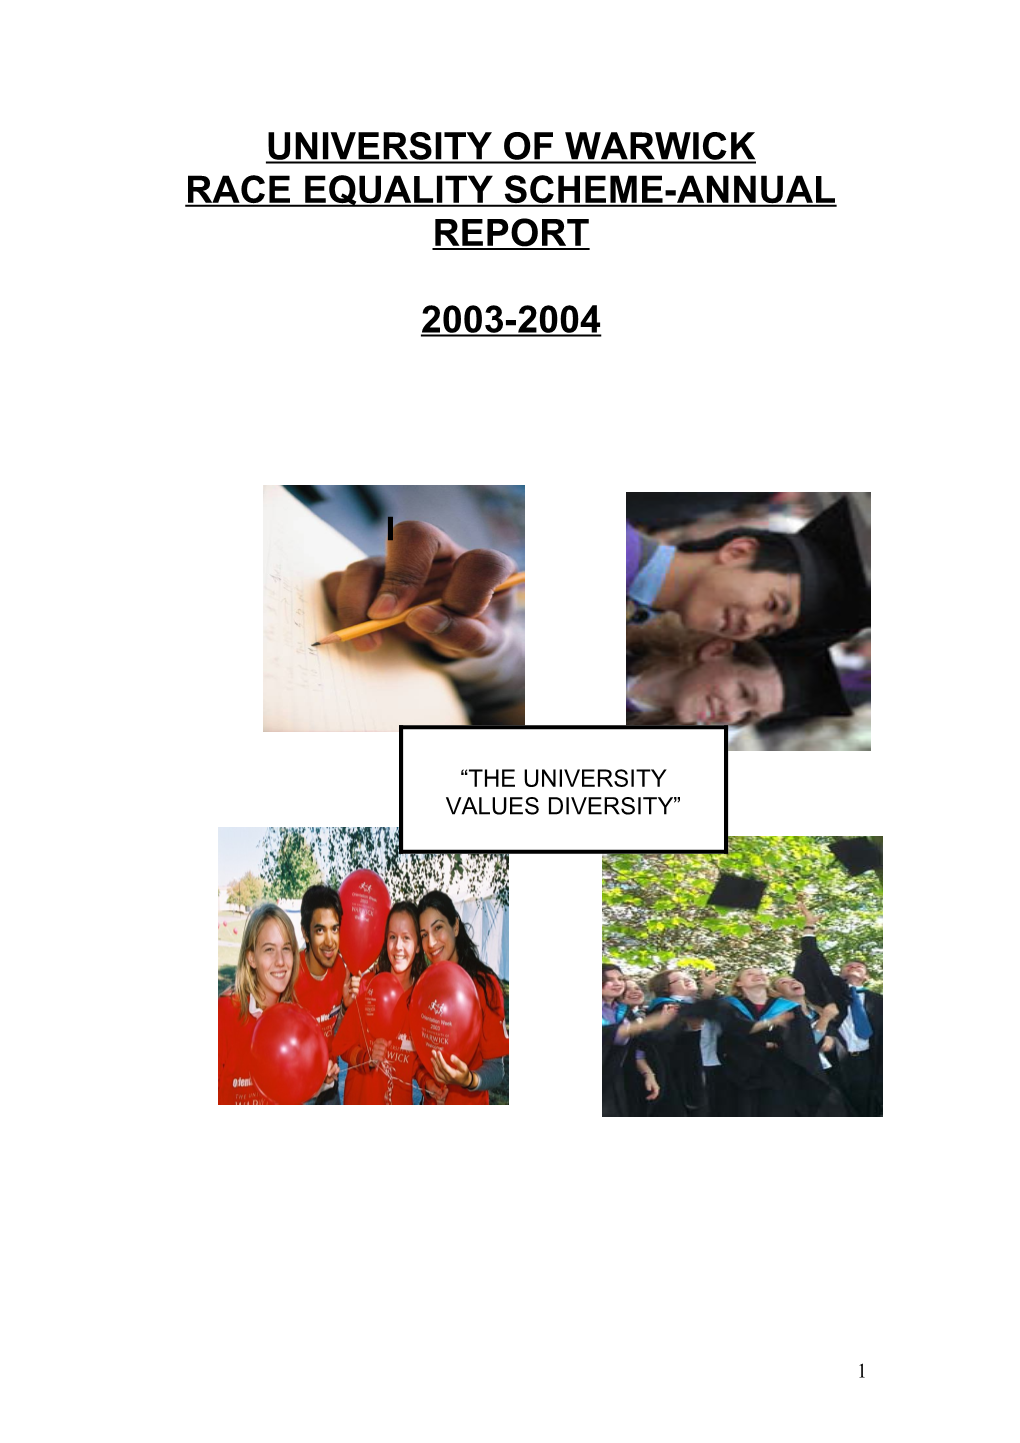 Race Equality Scheme-Annual Report